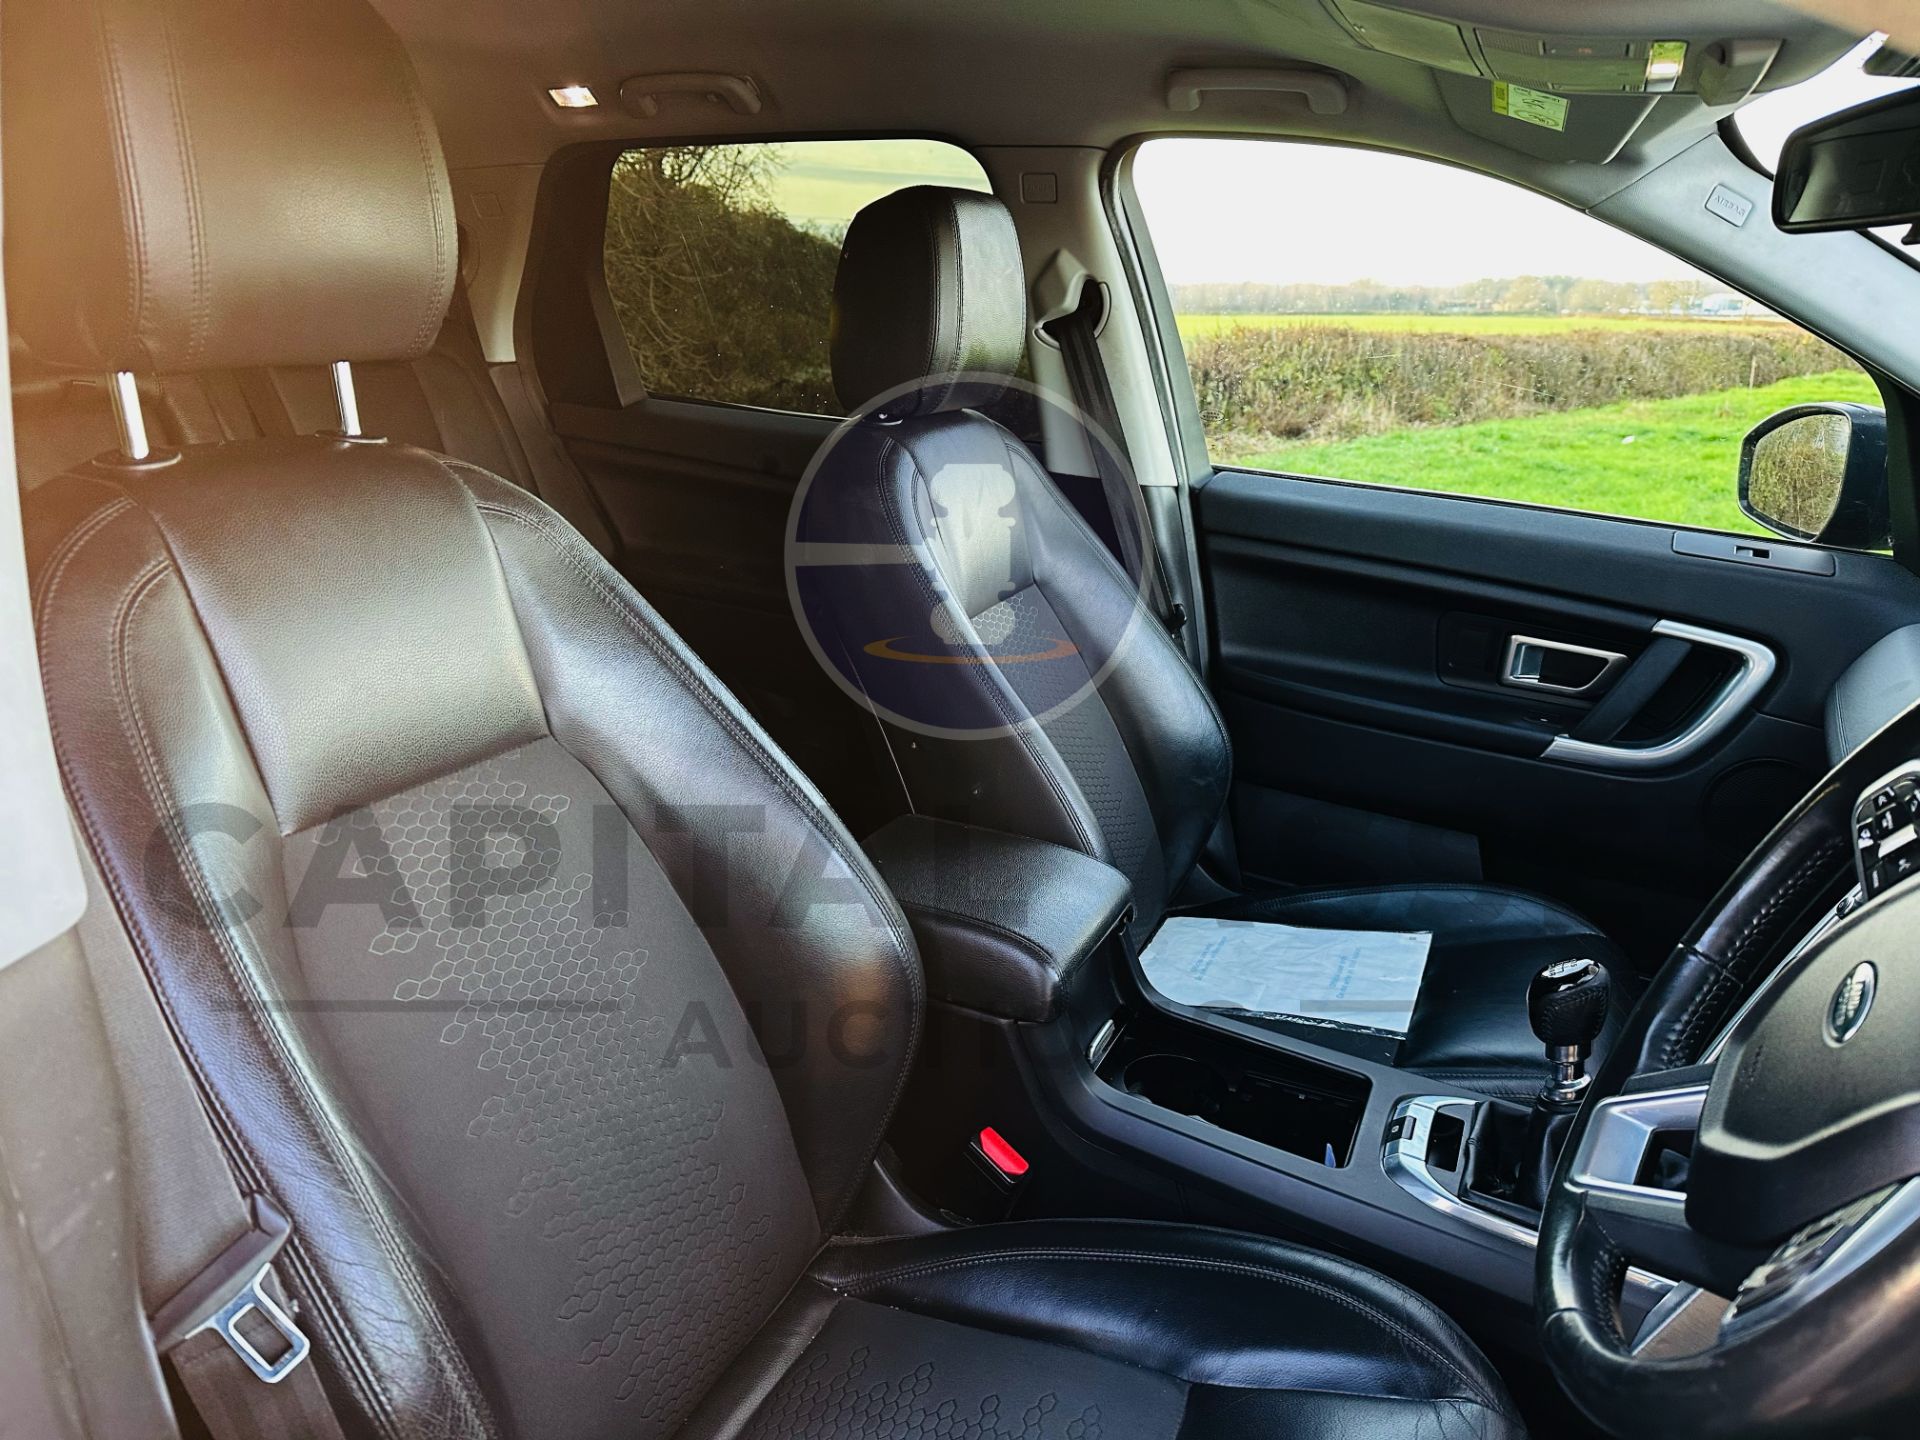 (On Sale) LAND ROVER DISCOVERY SPORT *SE EDITION* (2017 MODEL) - 7 SEATER - AIR CON - EURO 6 - Image 30 of 41